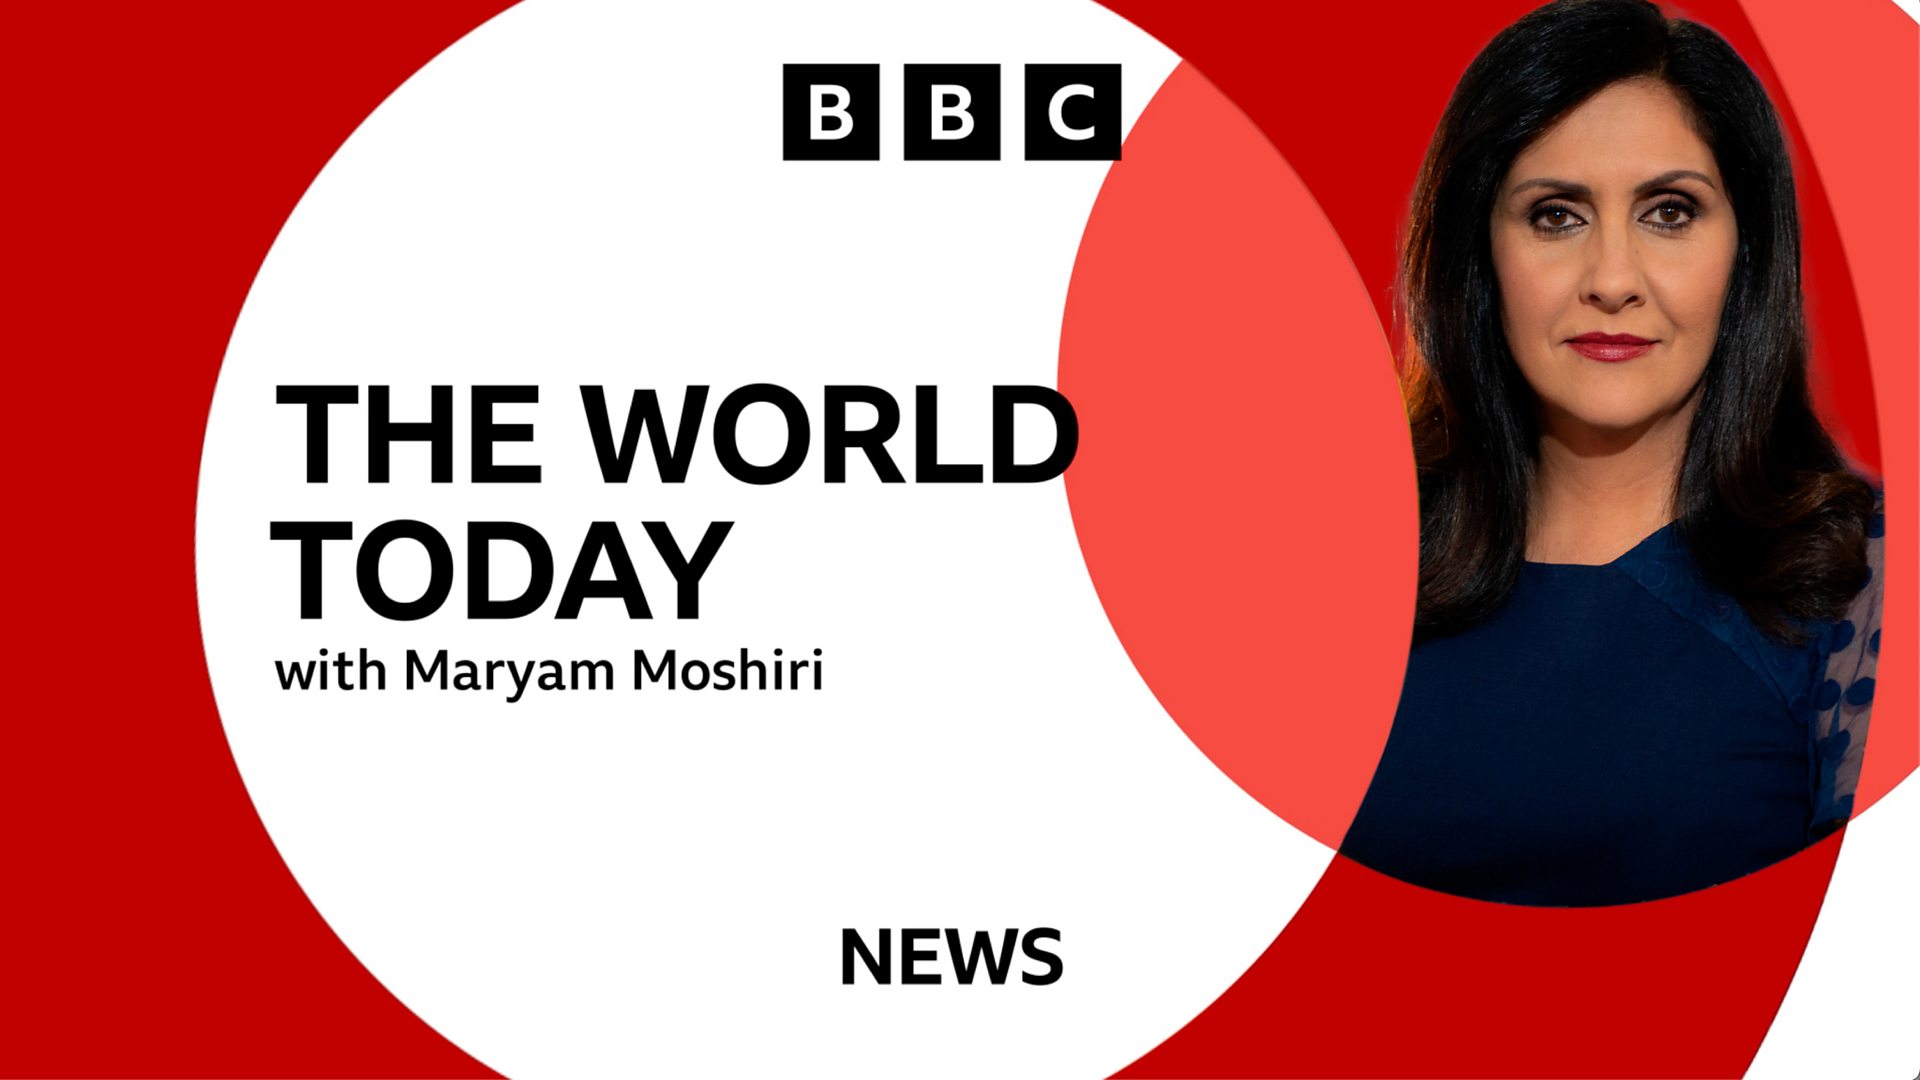 The World Today with Maryam Moshiri launches on the BBC News Channel